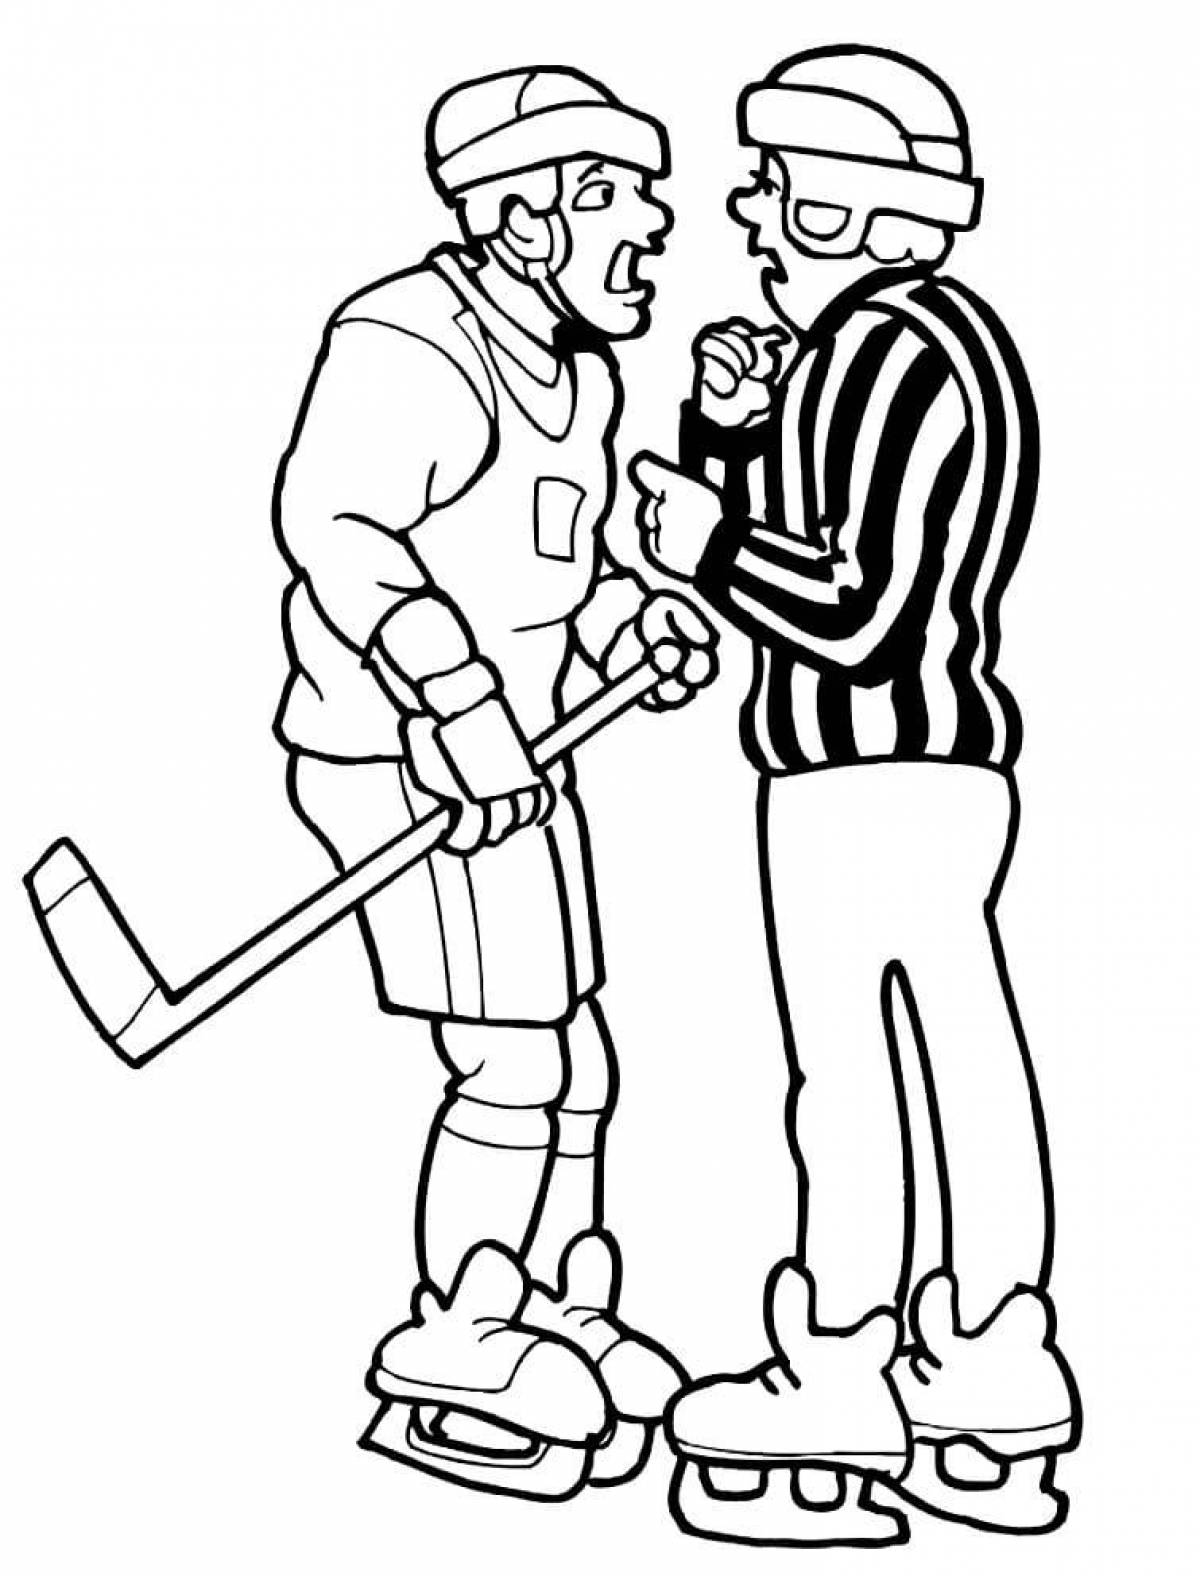 Amazing hockey player coloring page for kids